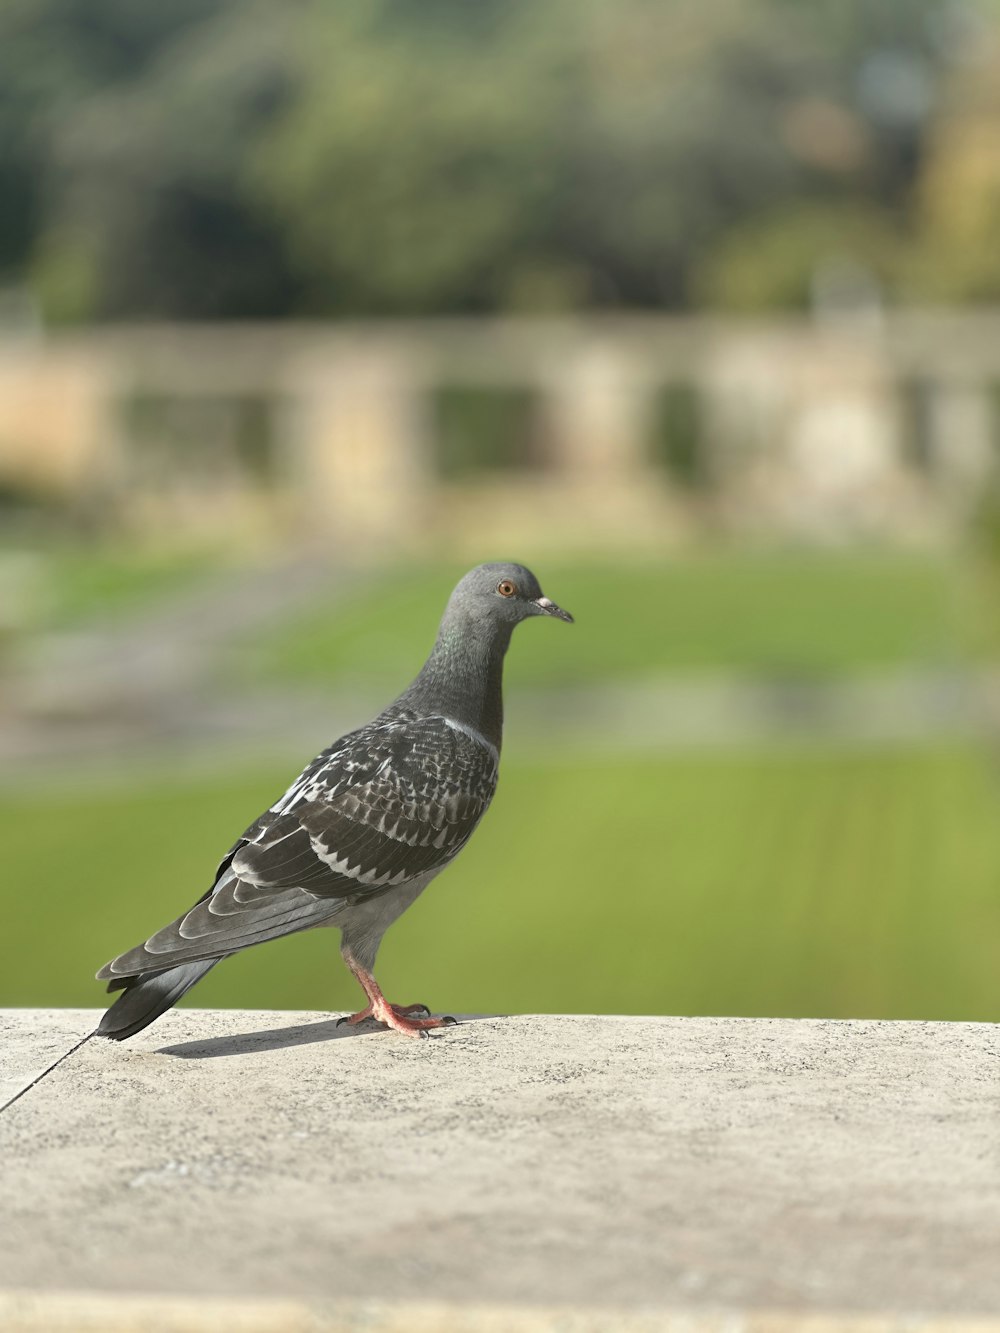 a bird is standing on a ledge outside